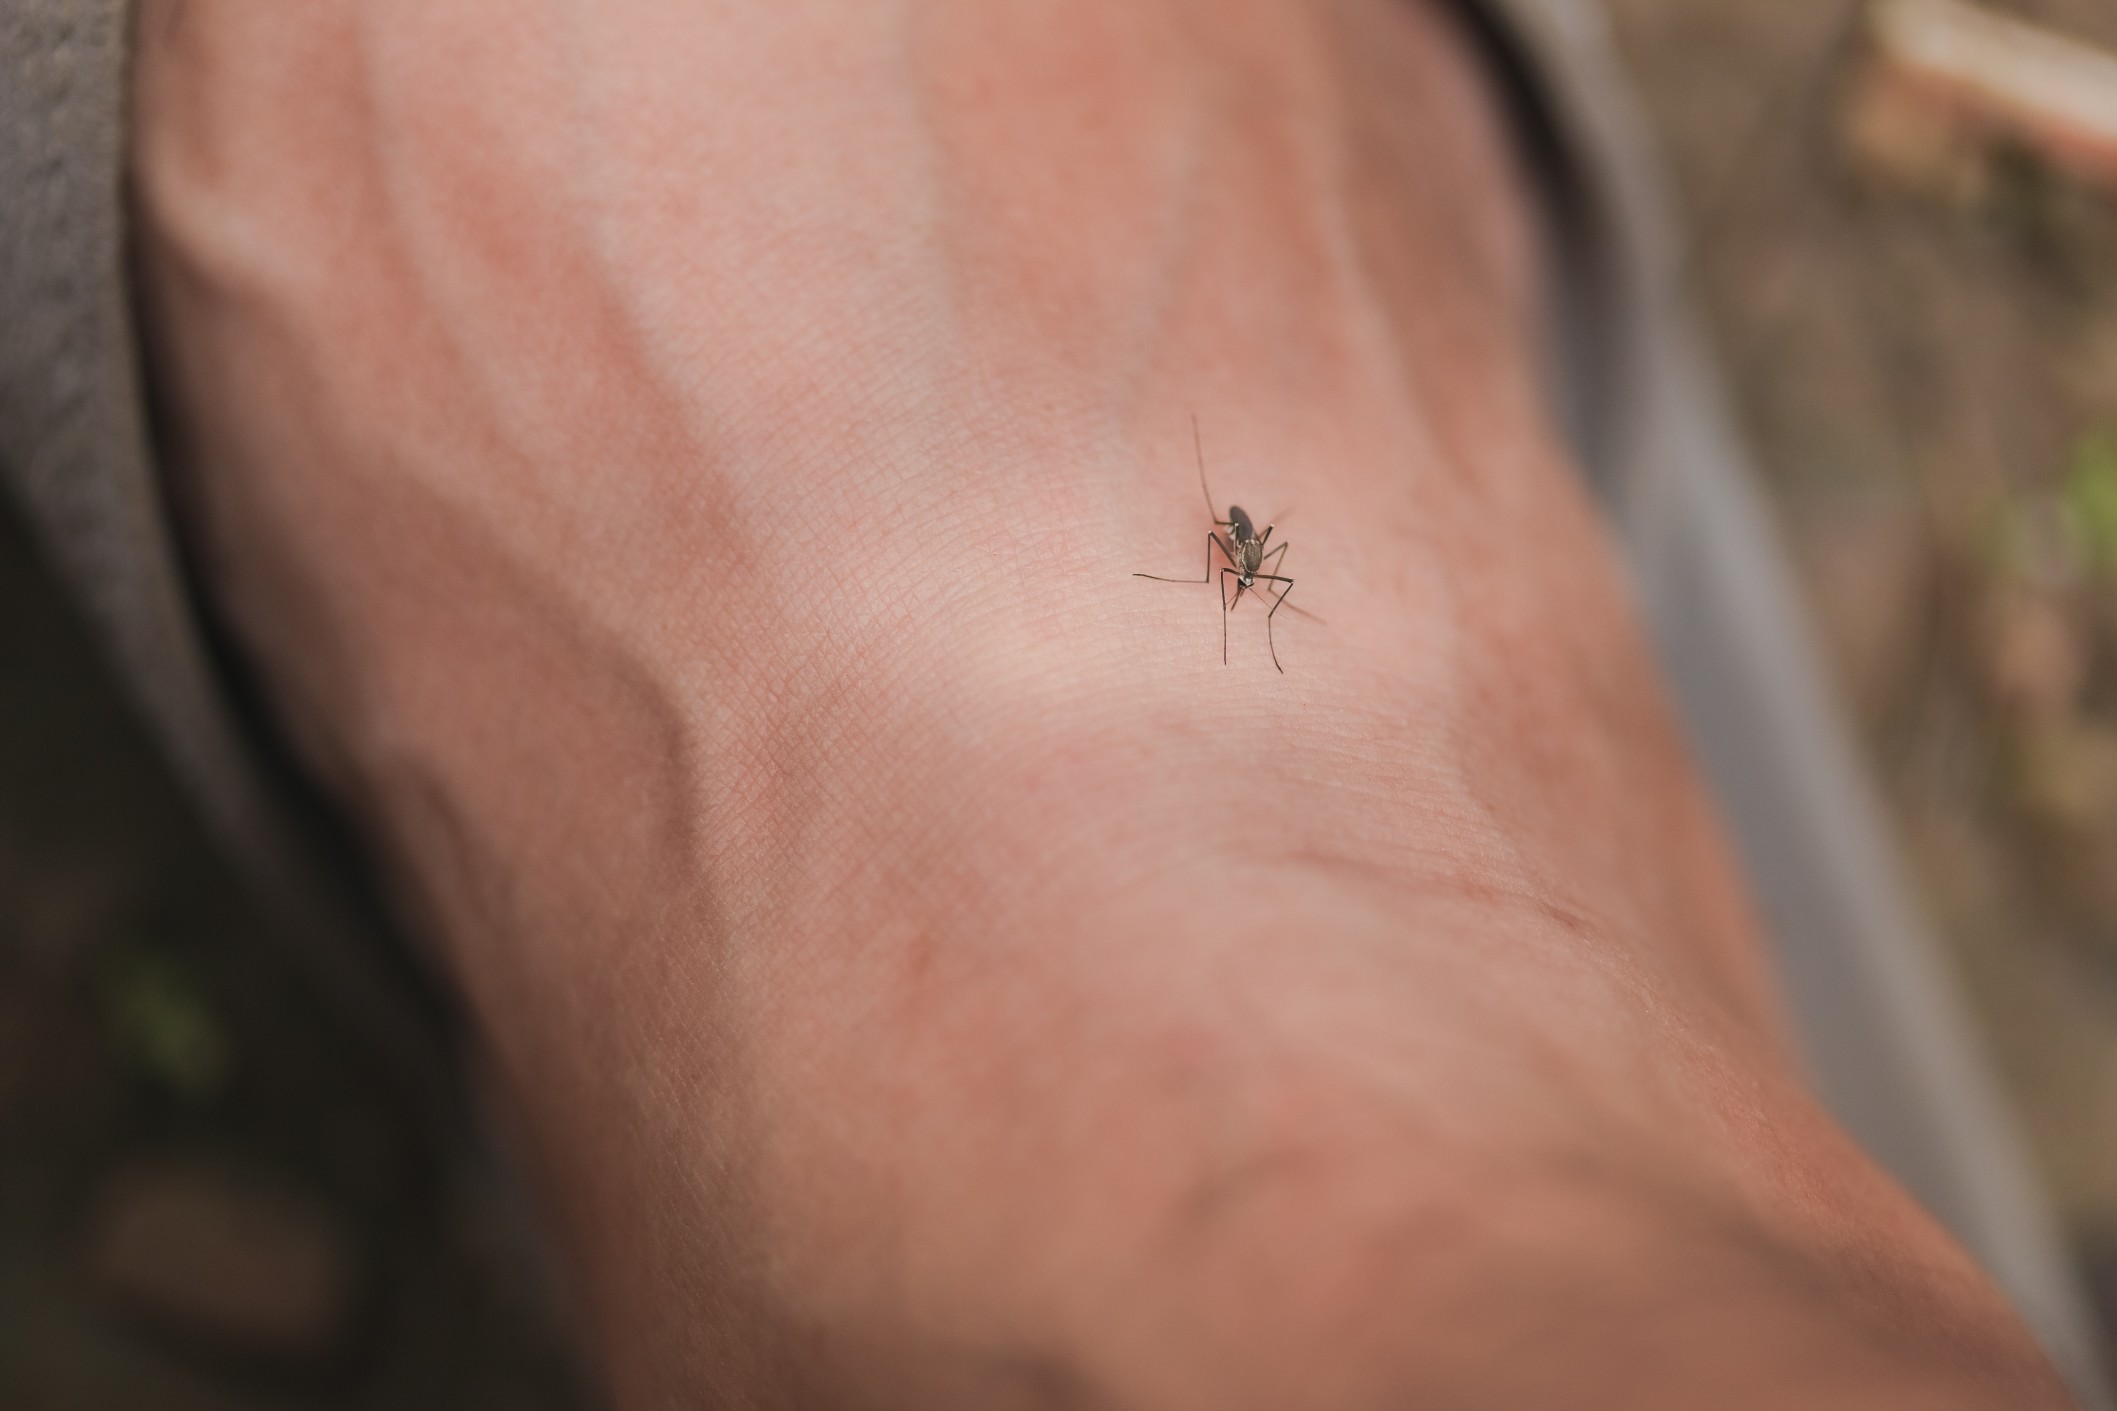 a mosquito on a human skin